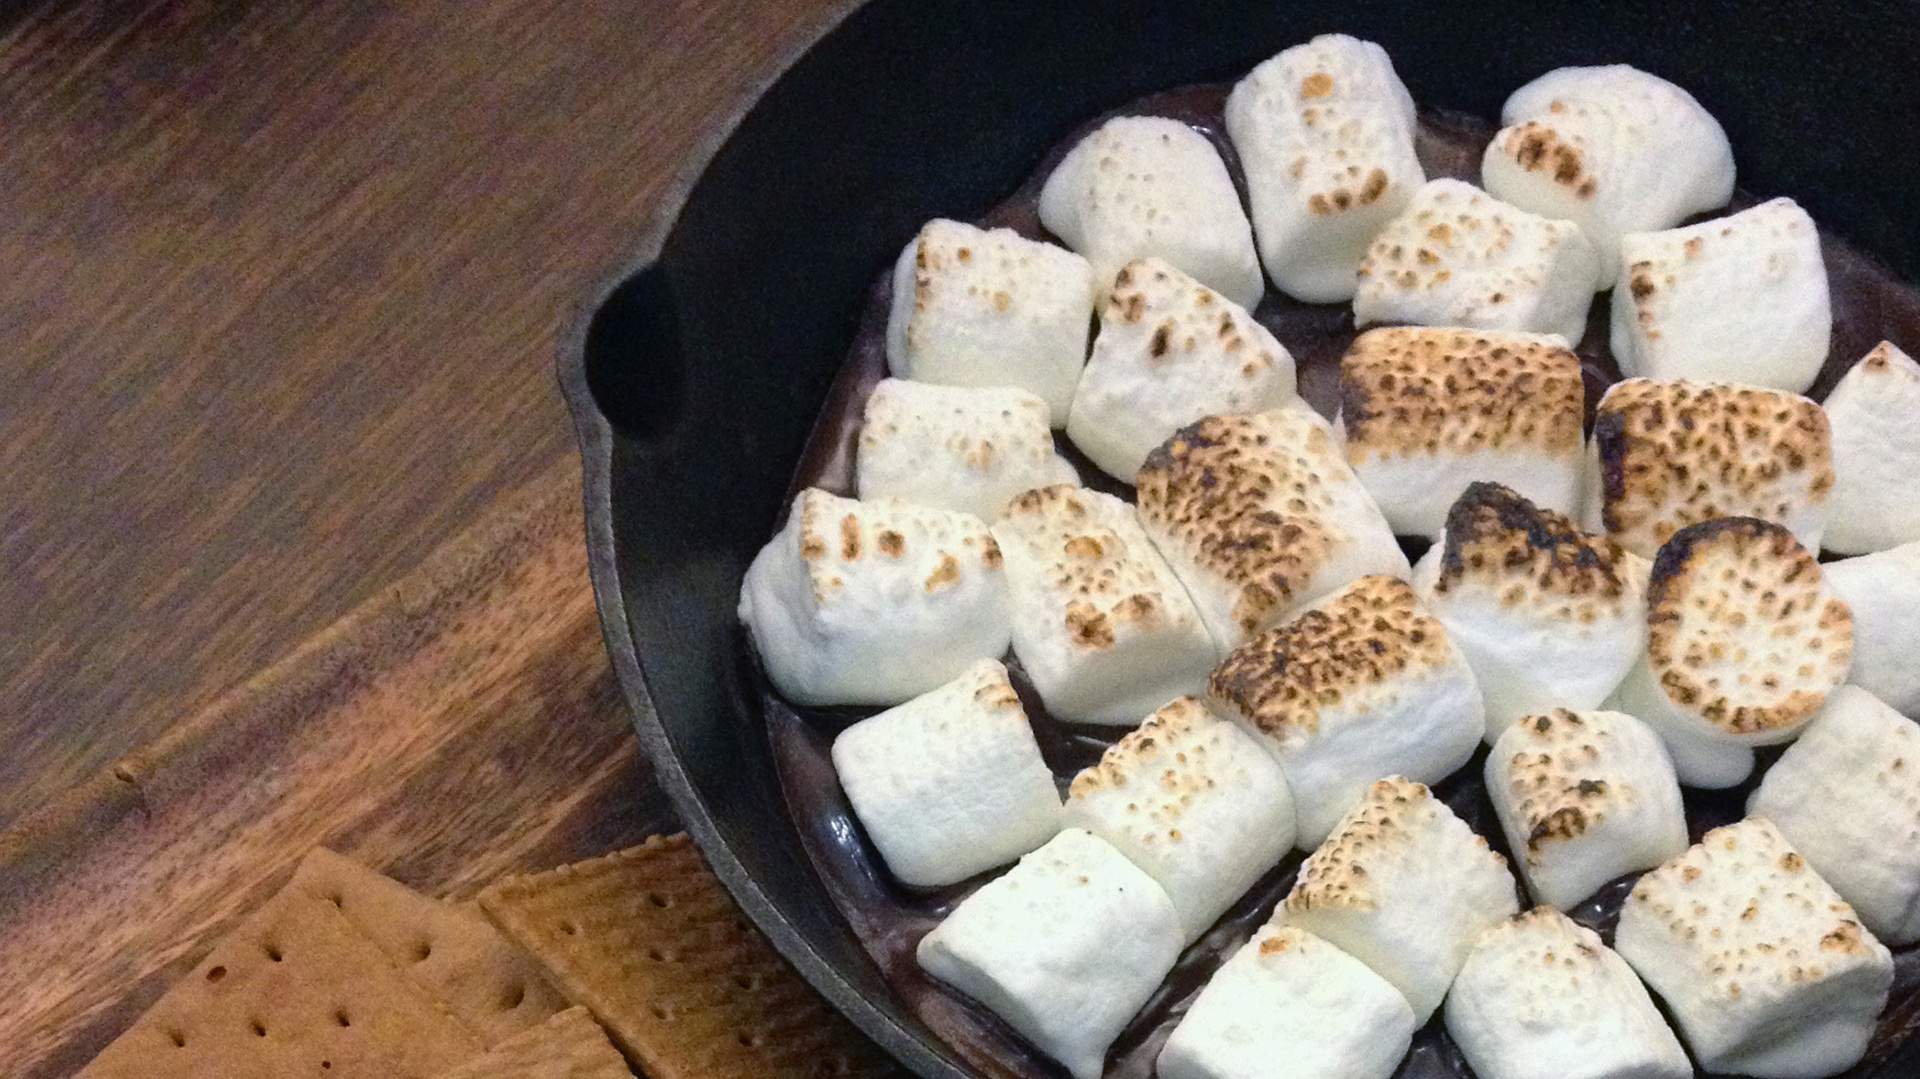 A Dedicated Marshmallow Cafe Is Opening in Chicago